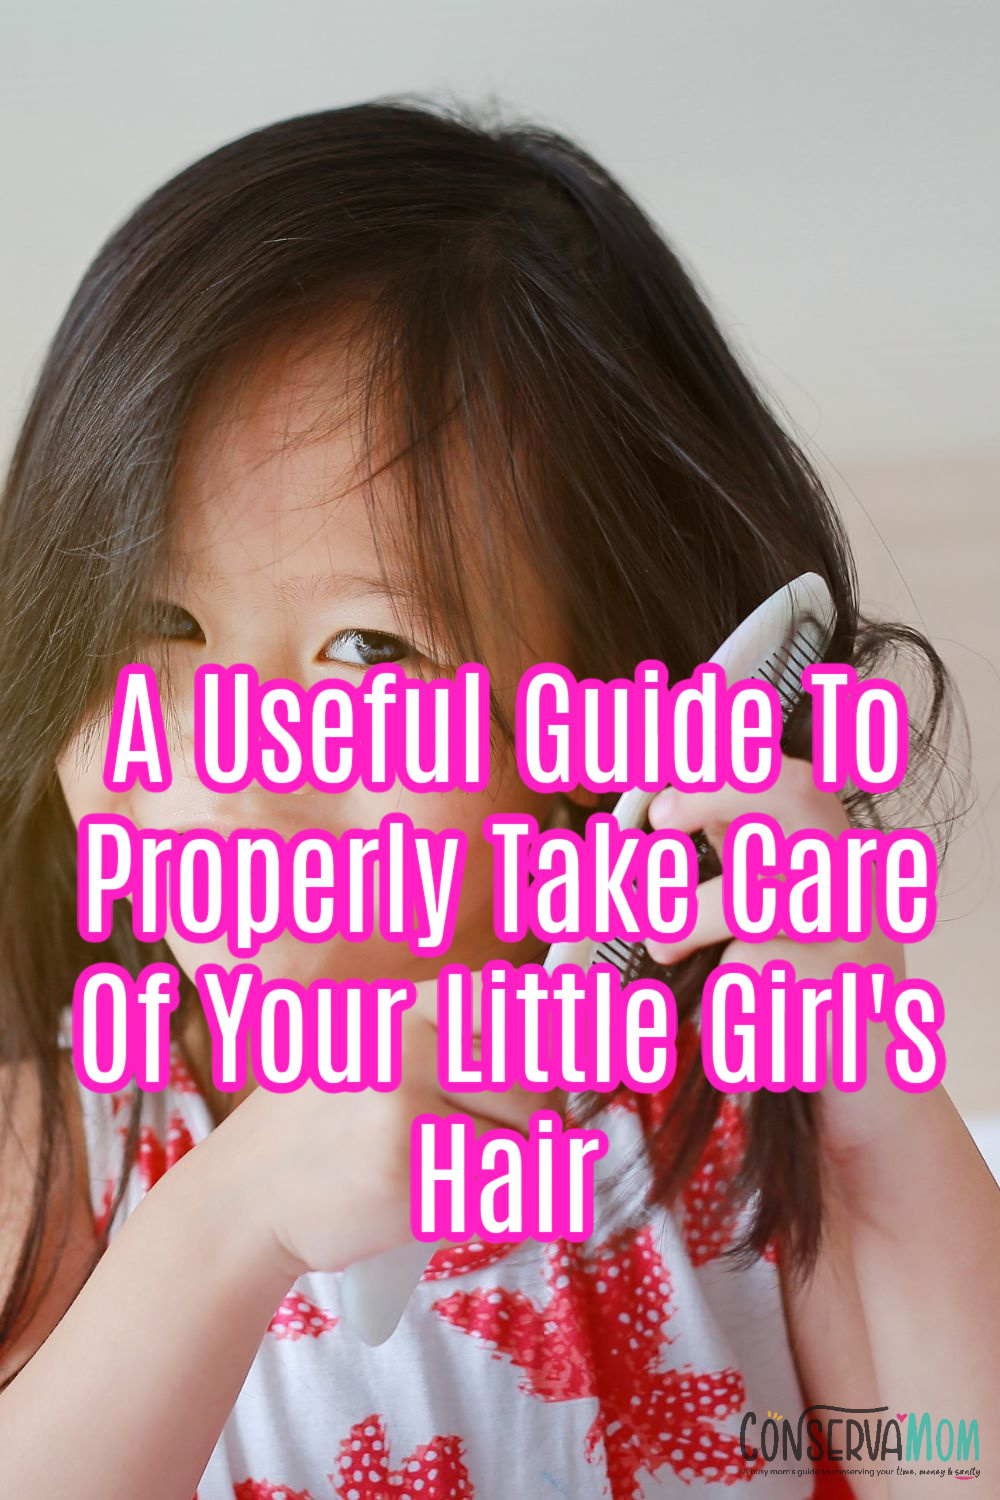 A Useful Guide to Properly Take Care of your Little Girl's Hair